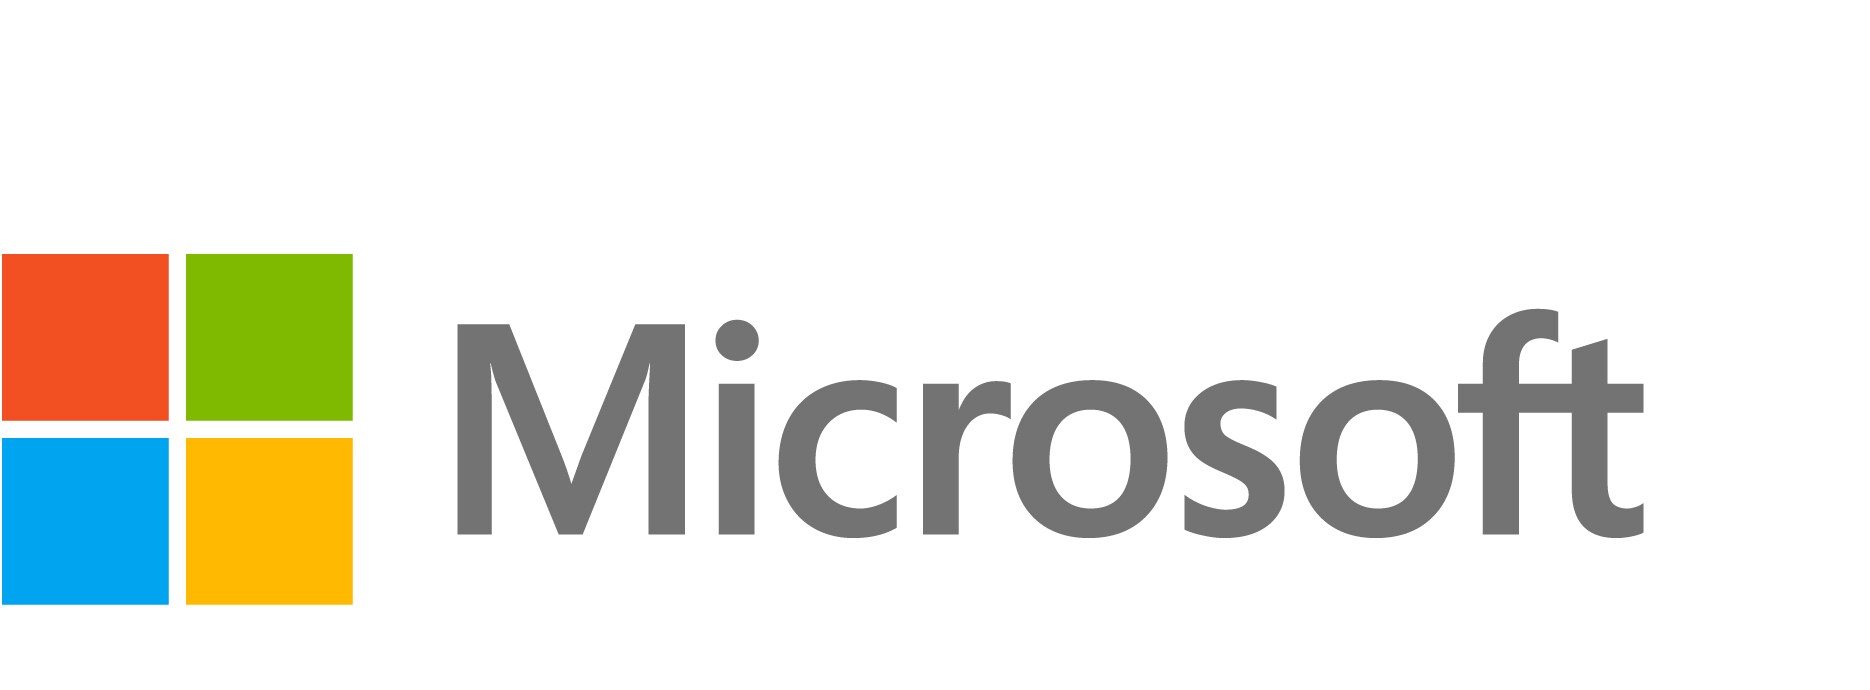 Microsoft System Center Service Manager Client Management License - software assurance - 1 operating system environment